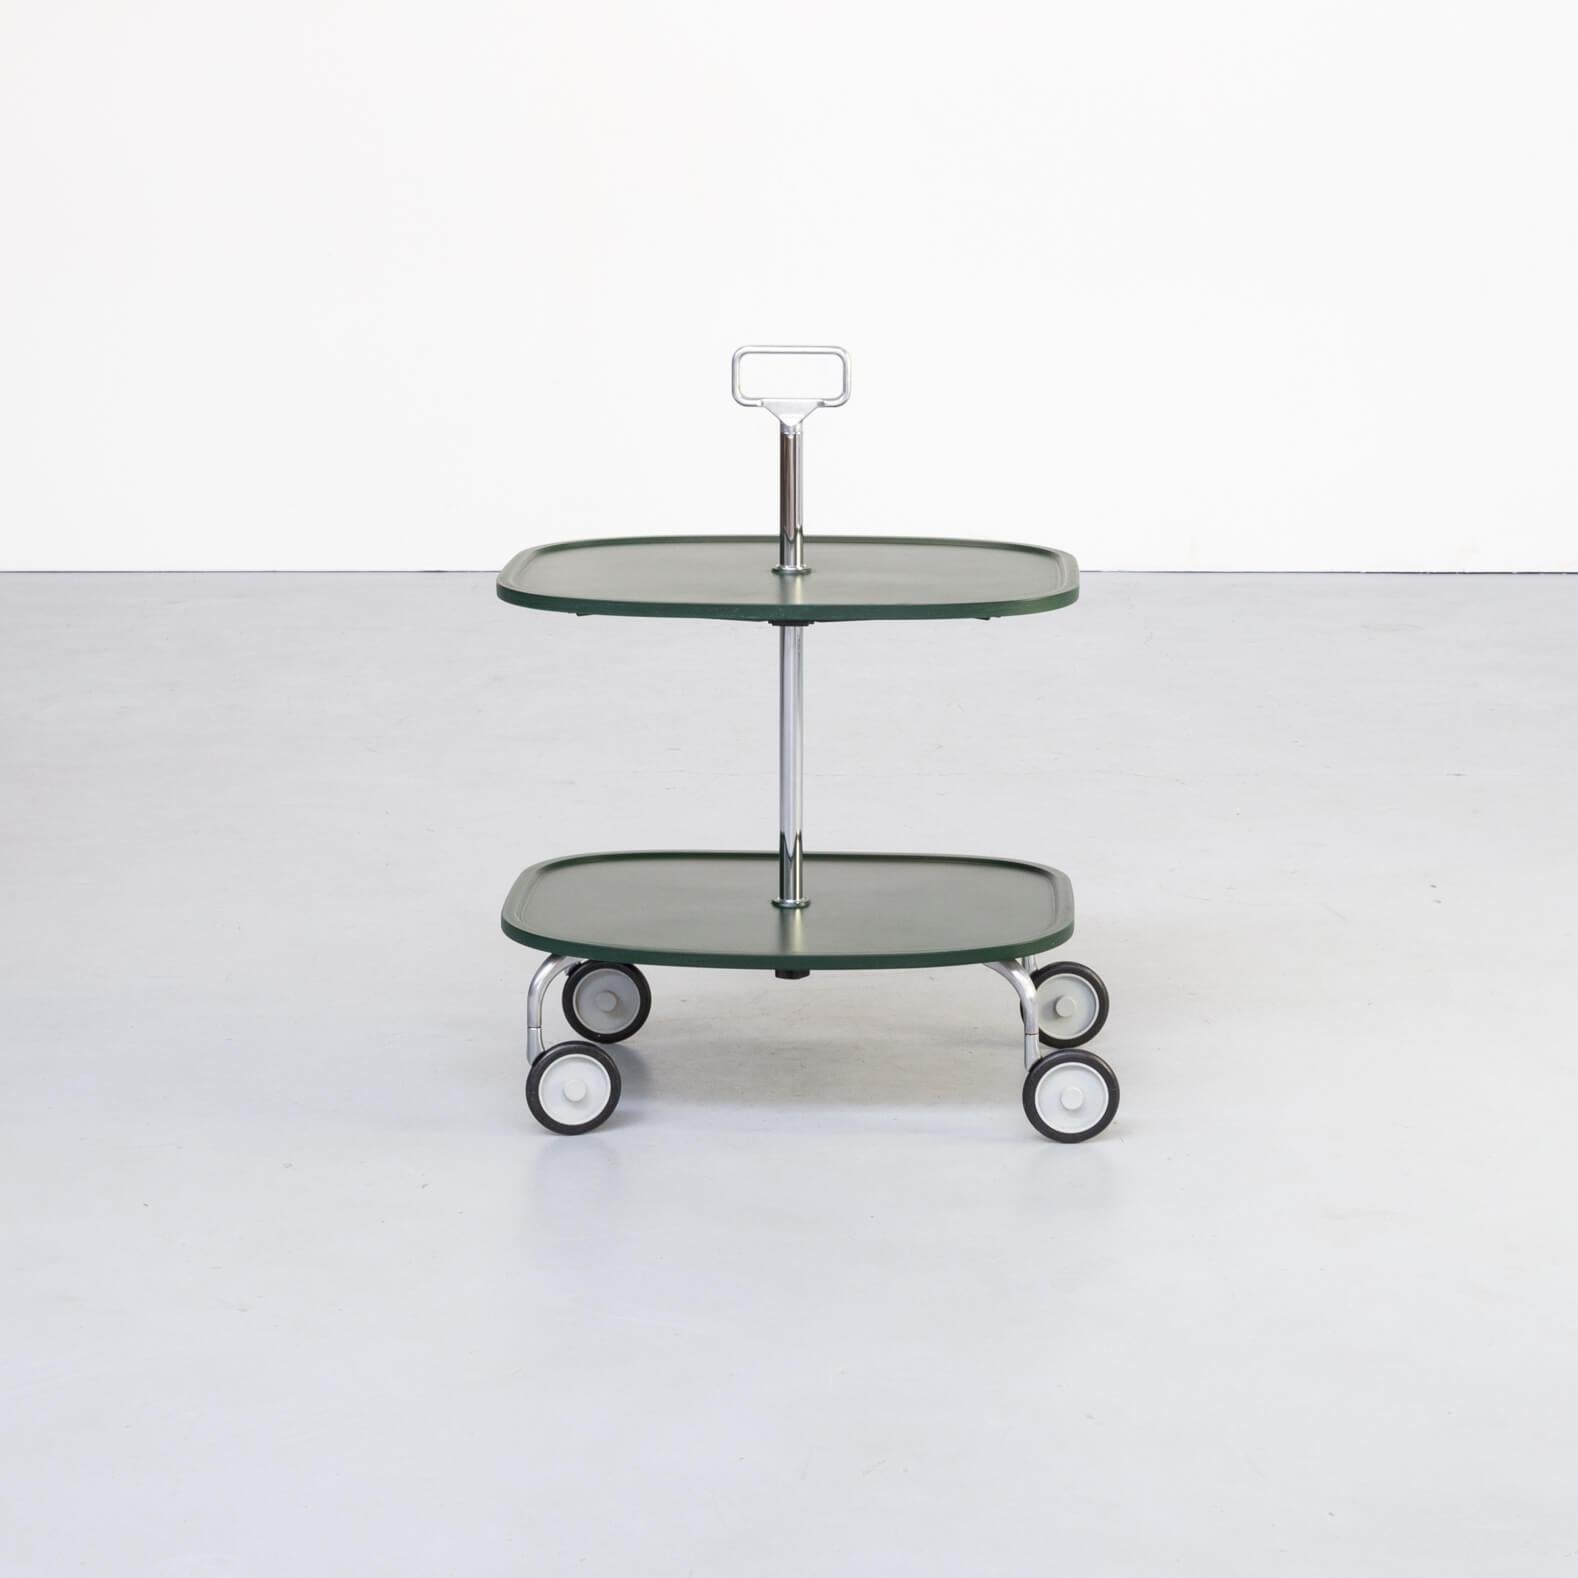 Elegant and practical serving trolley with varnished plastic top surface and chromed steel support.